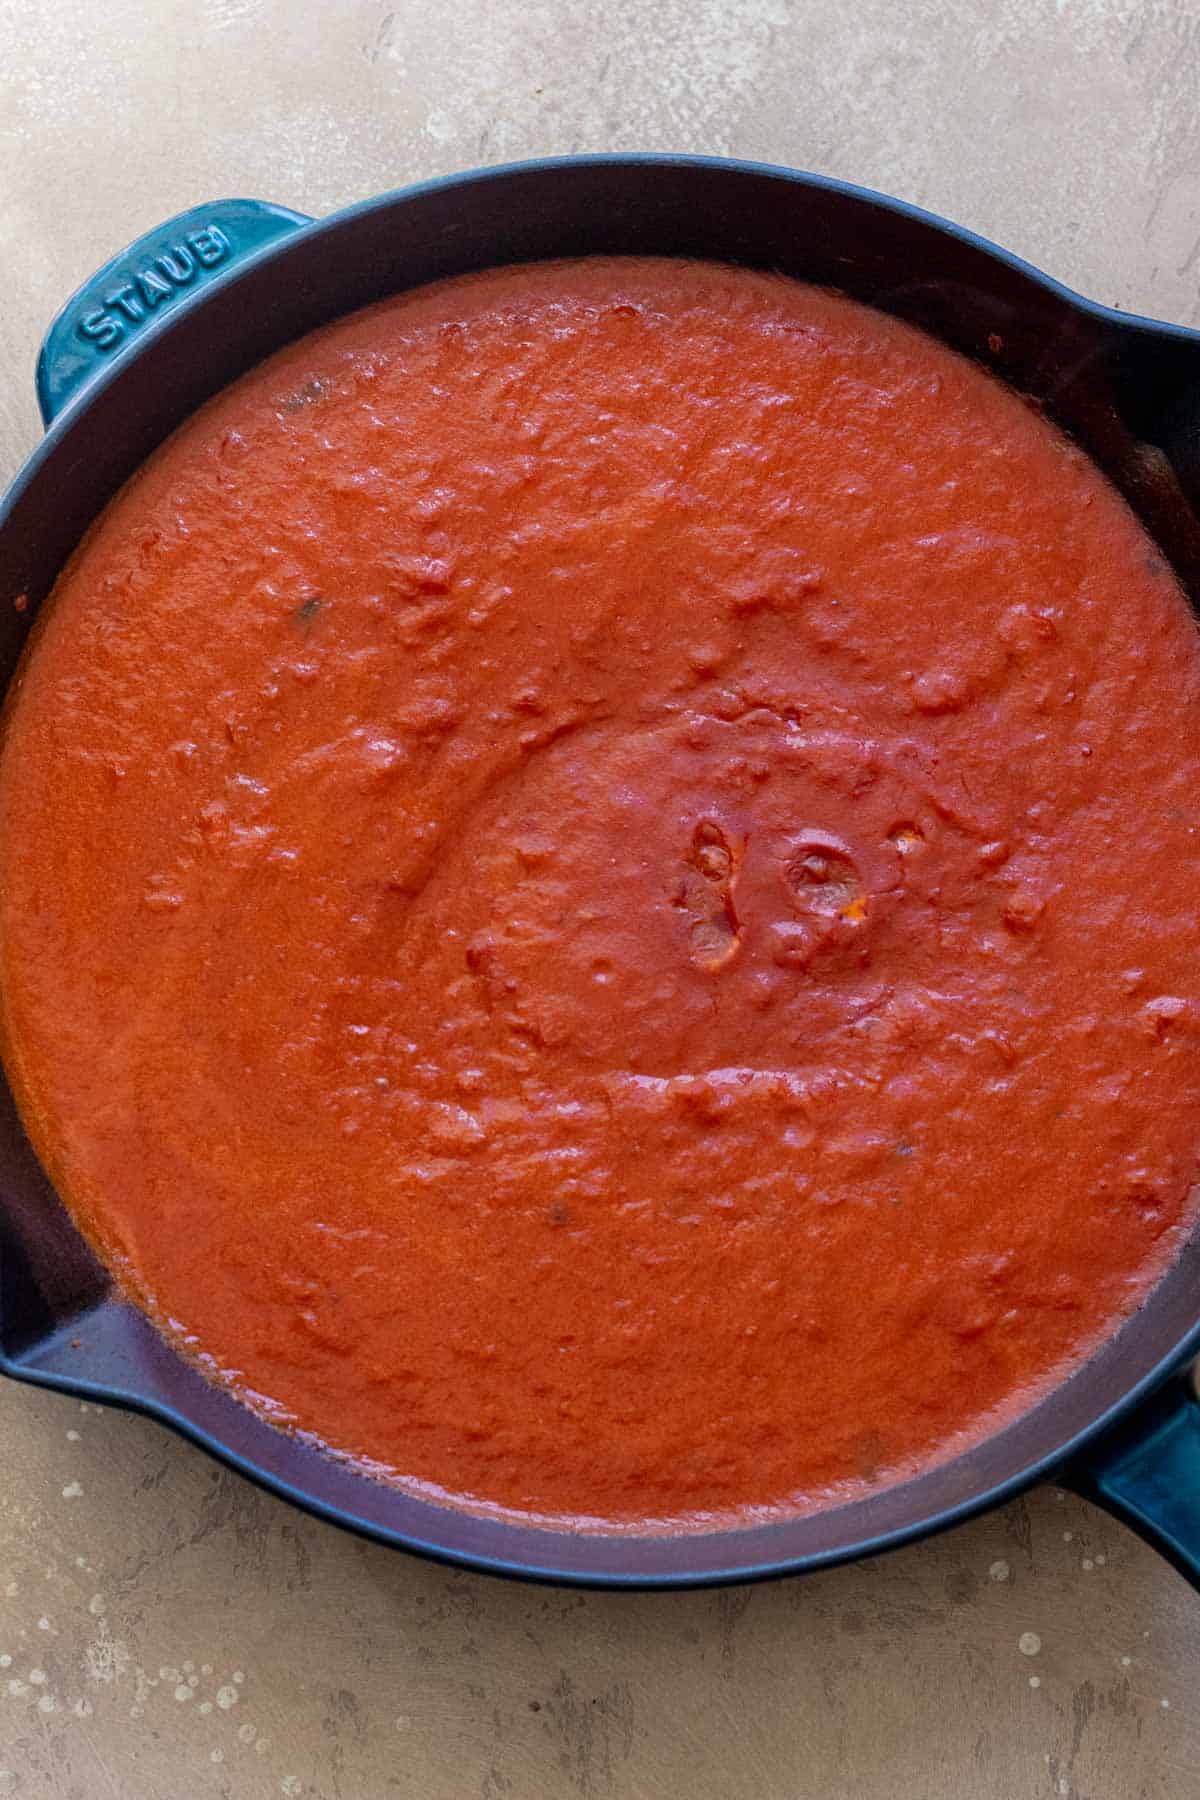 Marinara and oat milk mixed together in blue cast iron skillet.